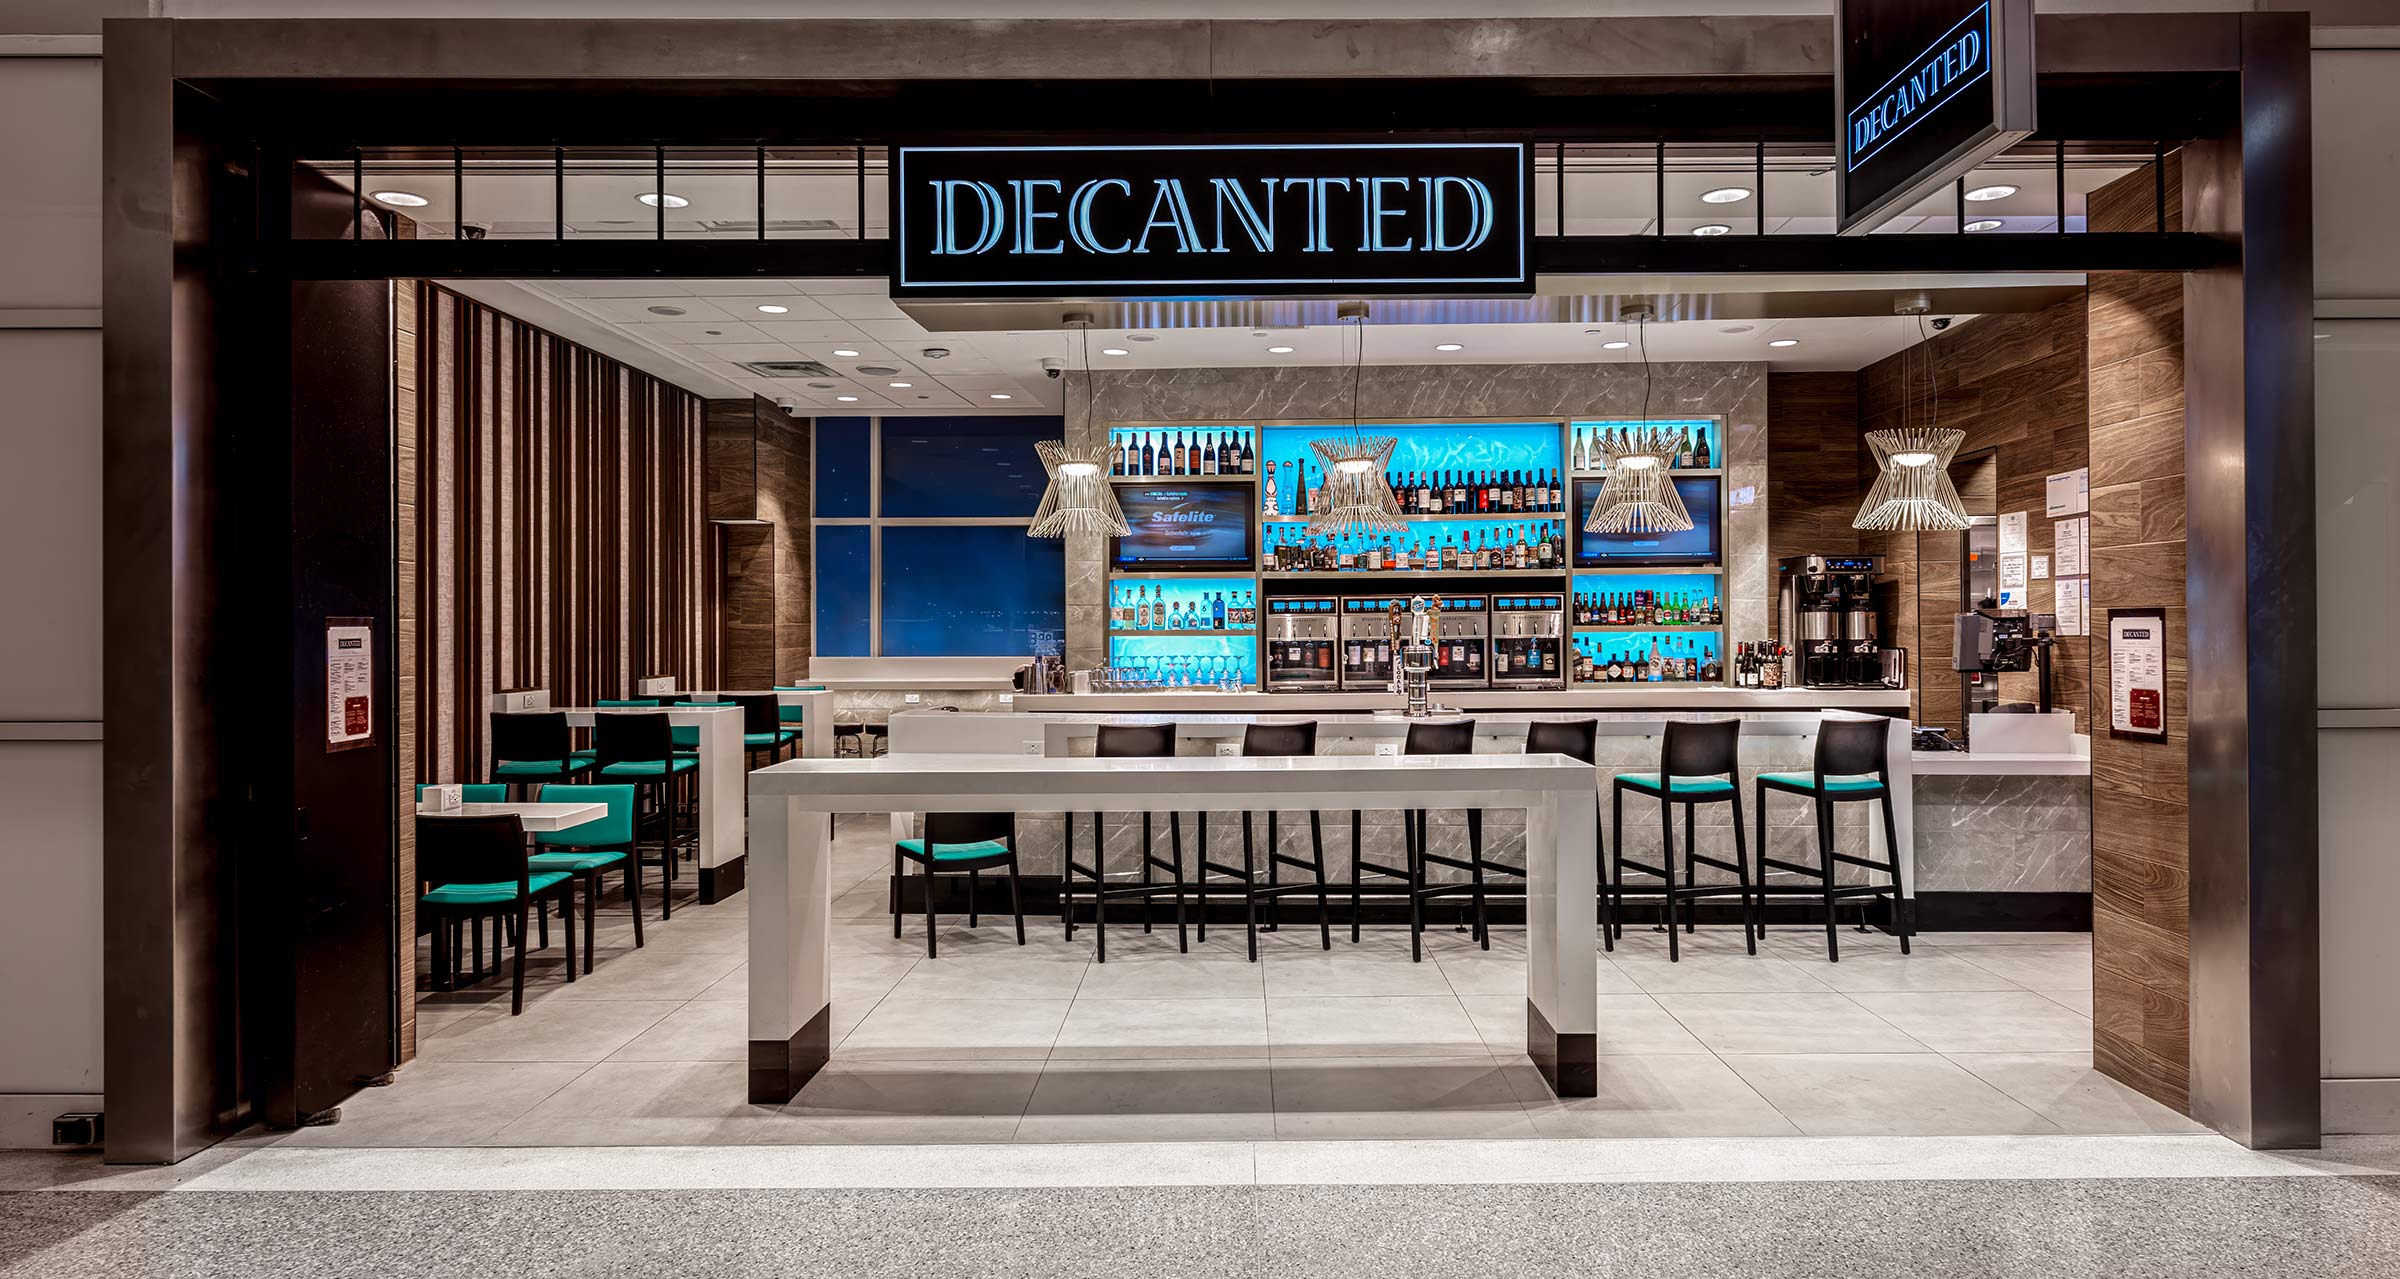 Decanted - DFW Airport 